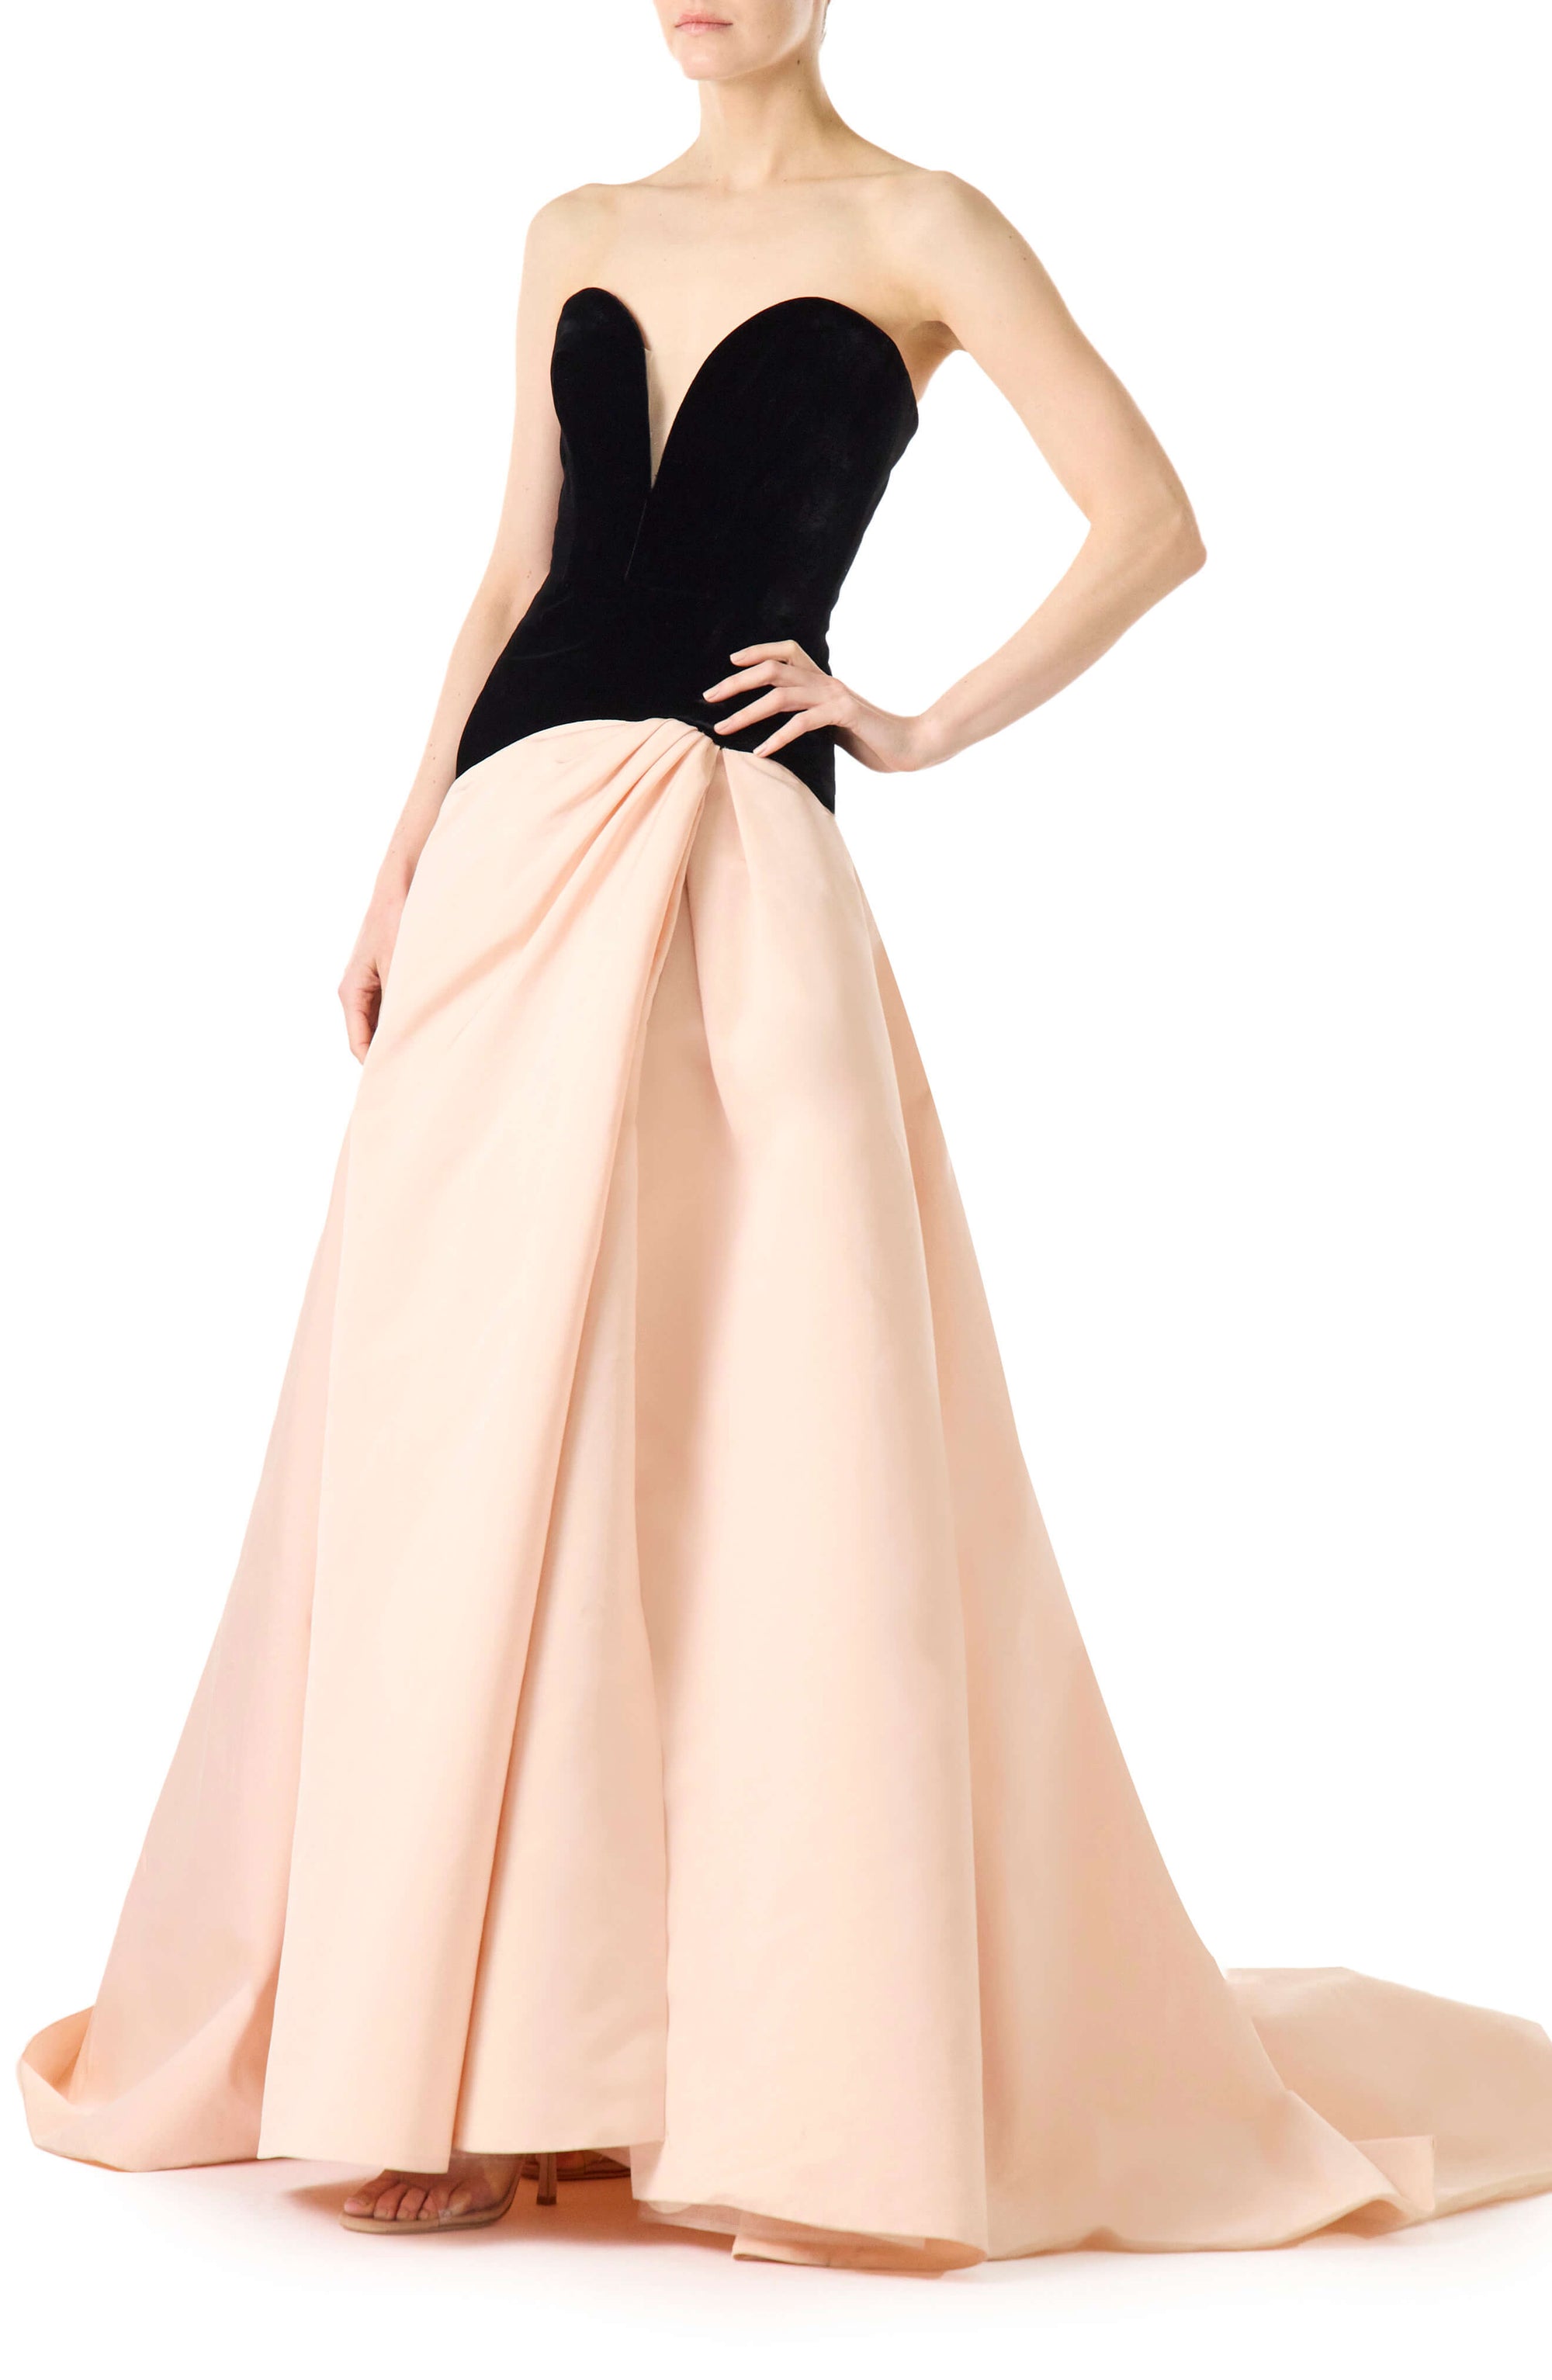 Monique Lhuillier pale blush and noir strapless ballgown with sweetheart neckline, drop waist and high slit in skirt.